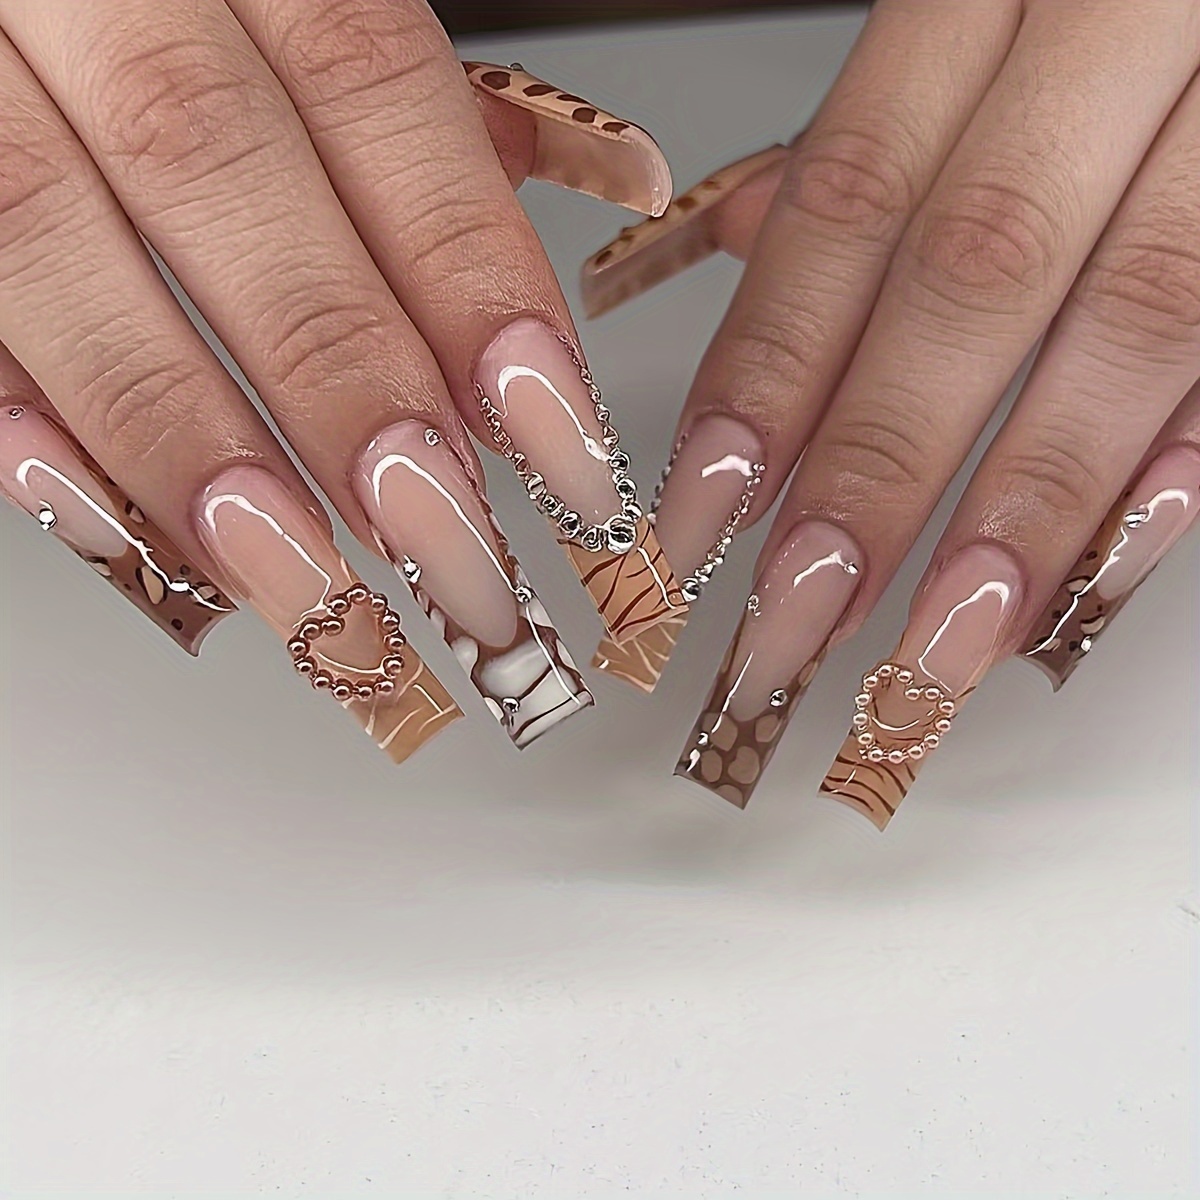 

24pcs Luxe Brown French Tip Press-on Nails With Rhinestones - Long Square, Glossy Finish For A Sophisticated Look